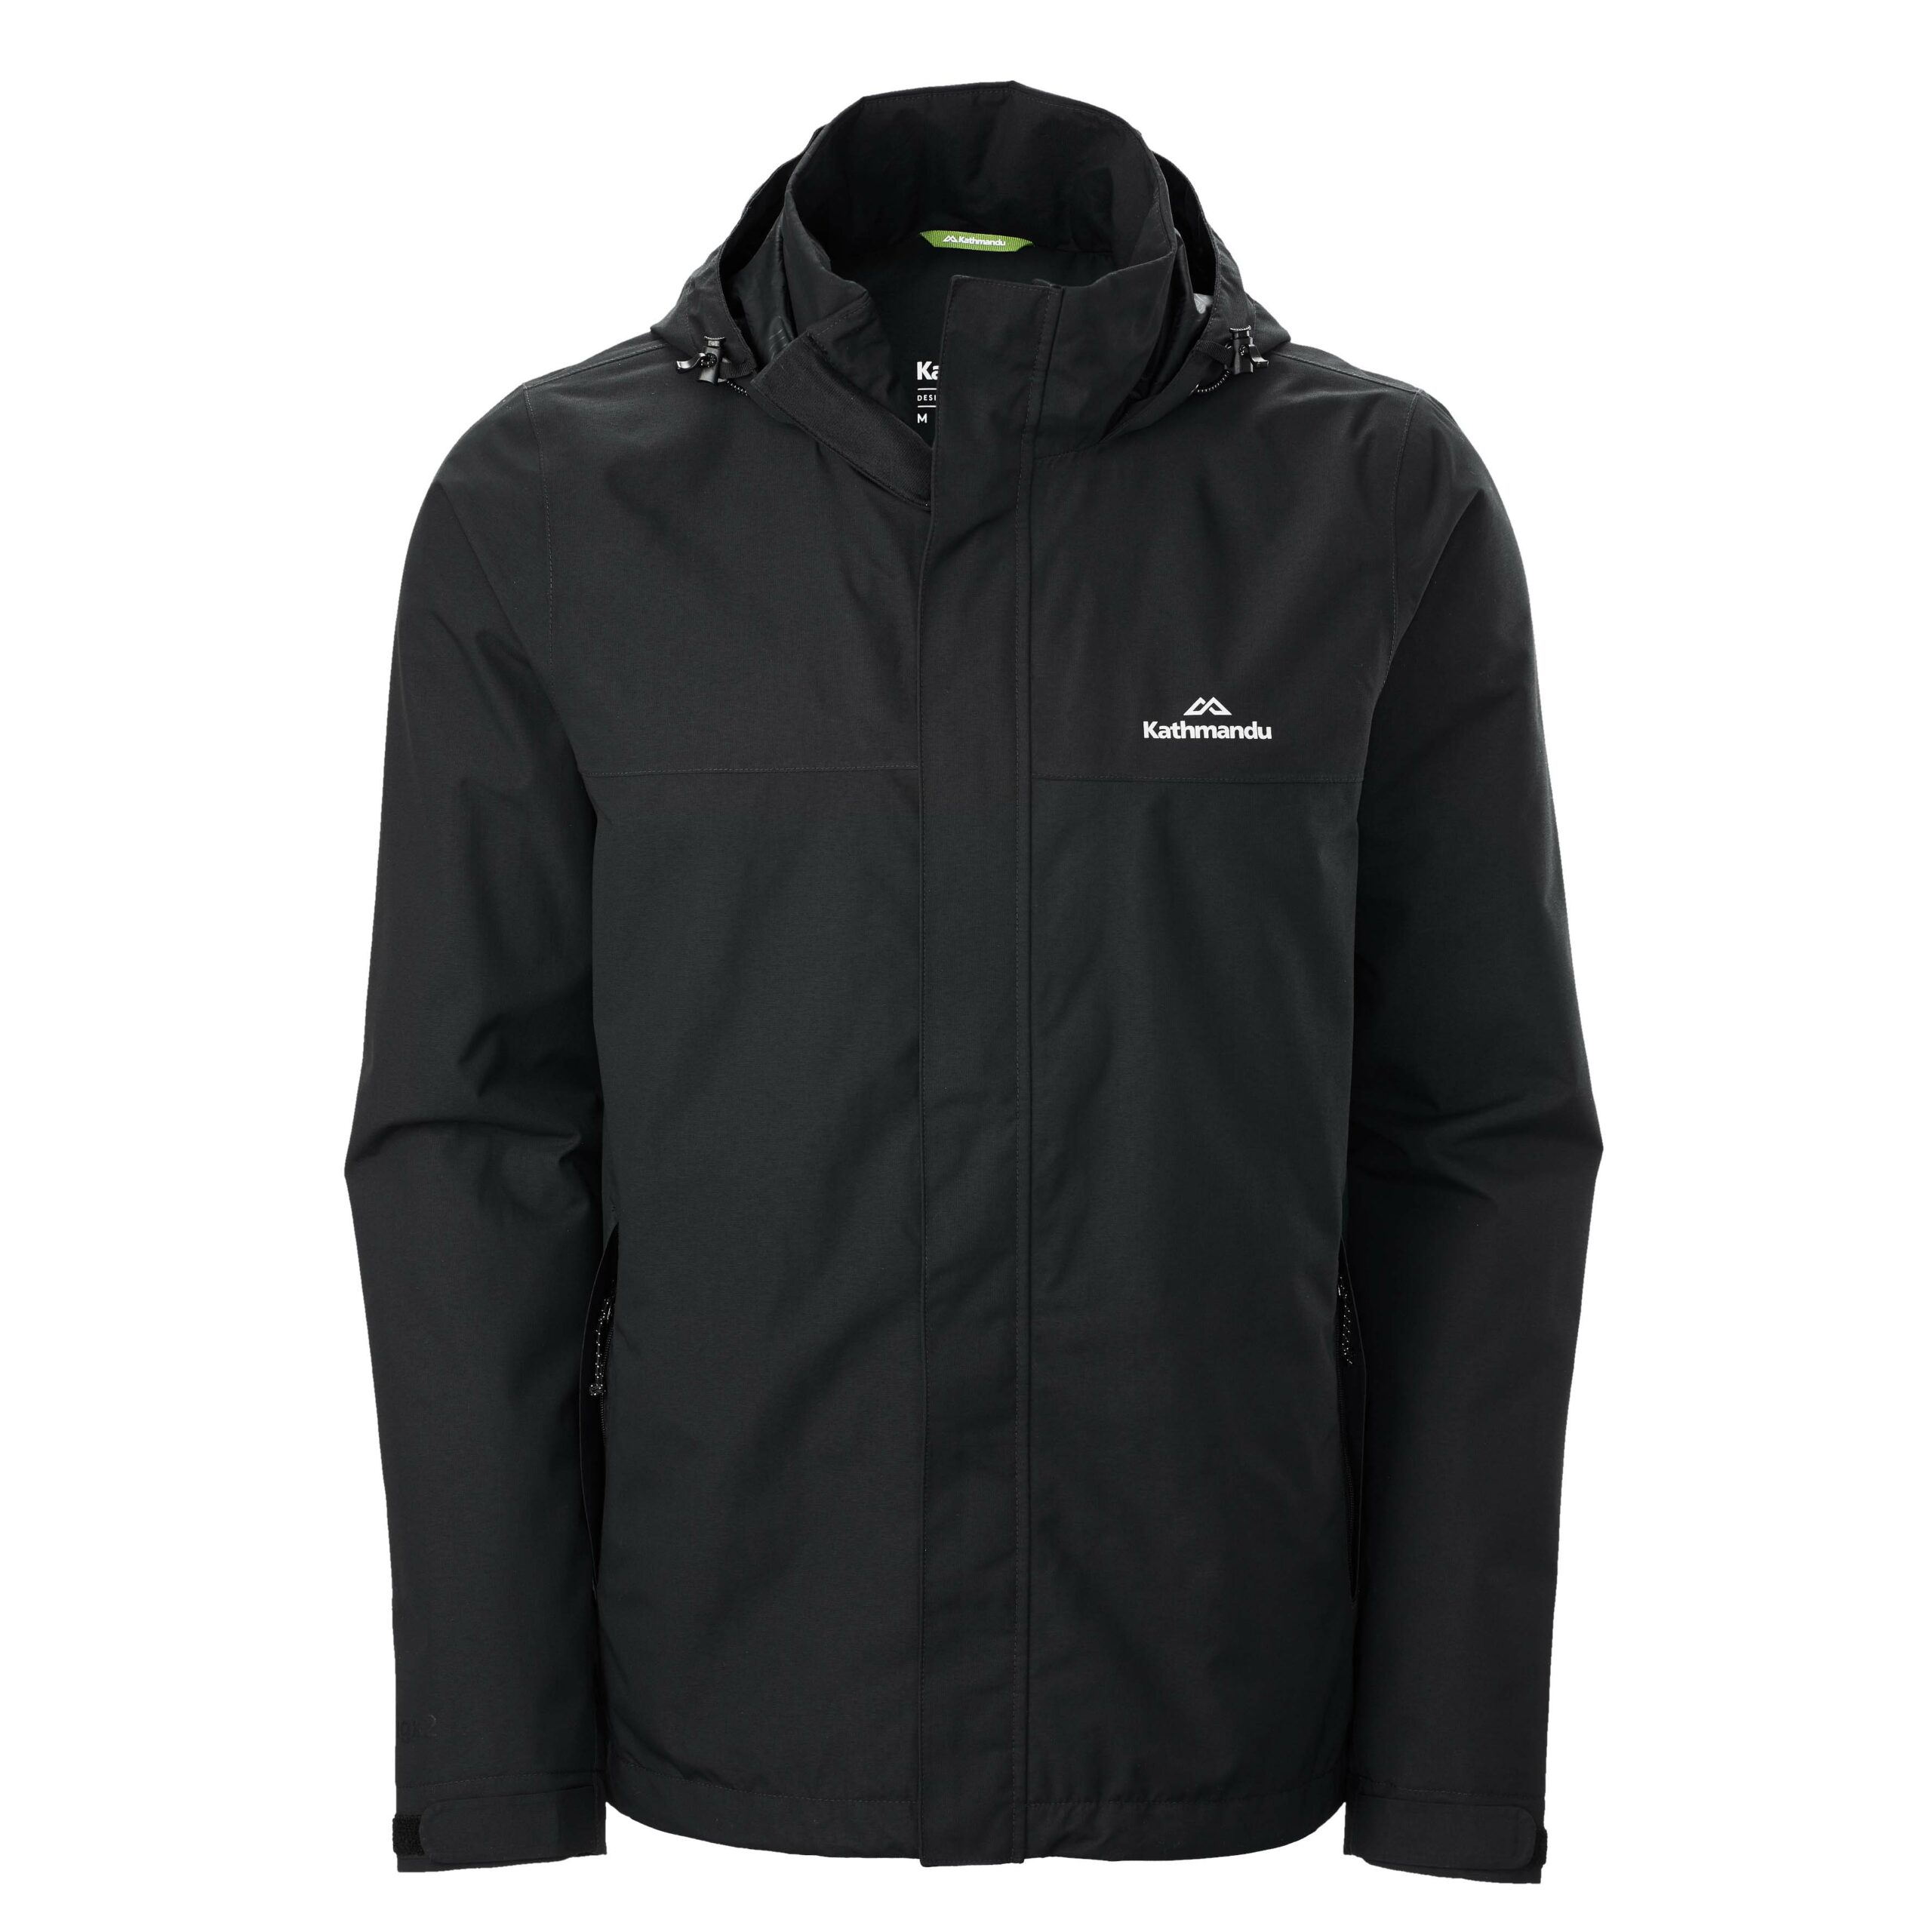 ANDULO RAIN JKT V3 (M) - Connect Promotions